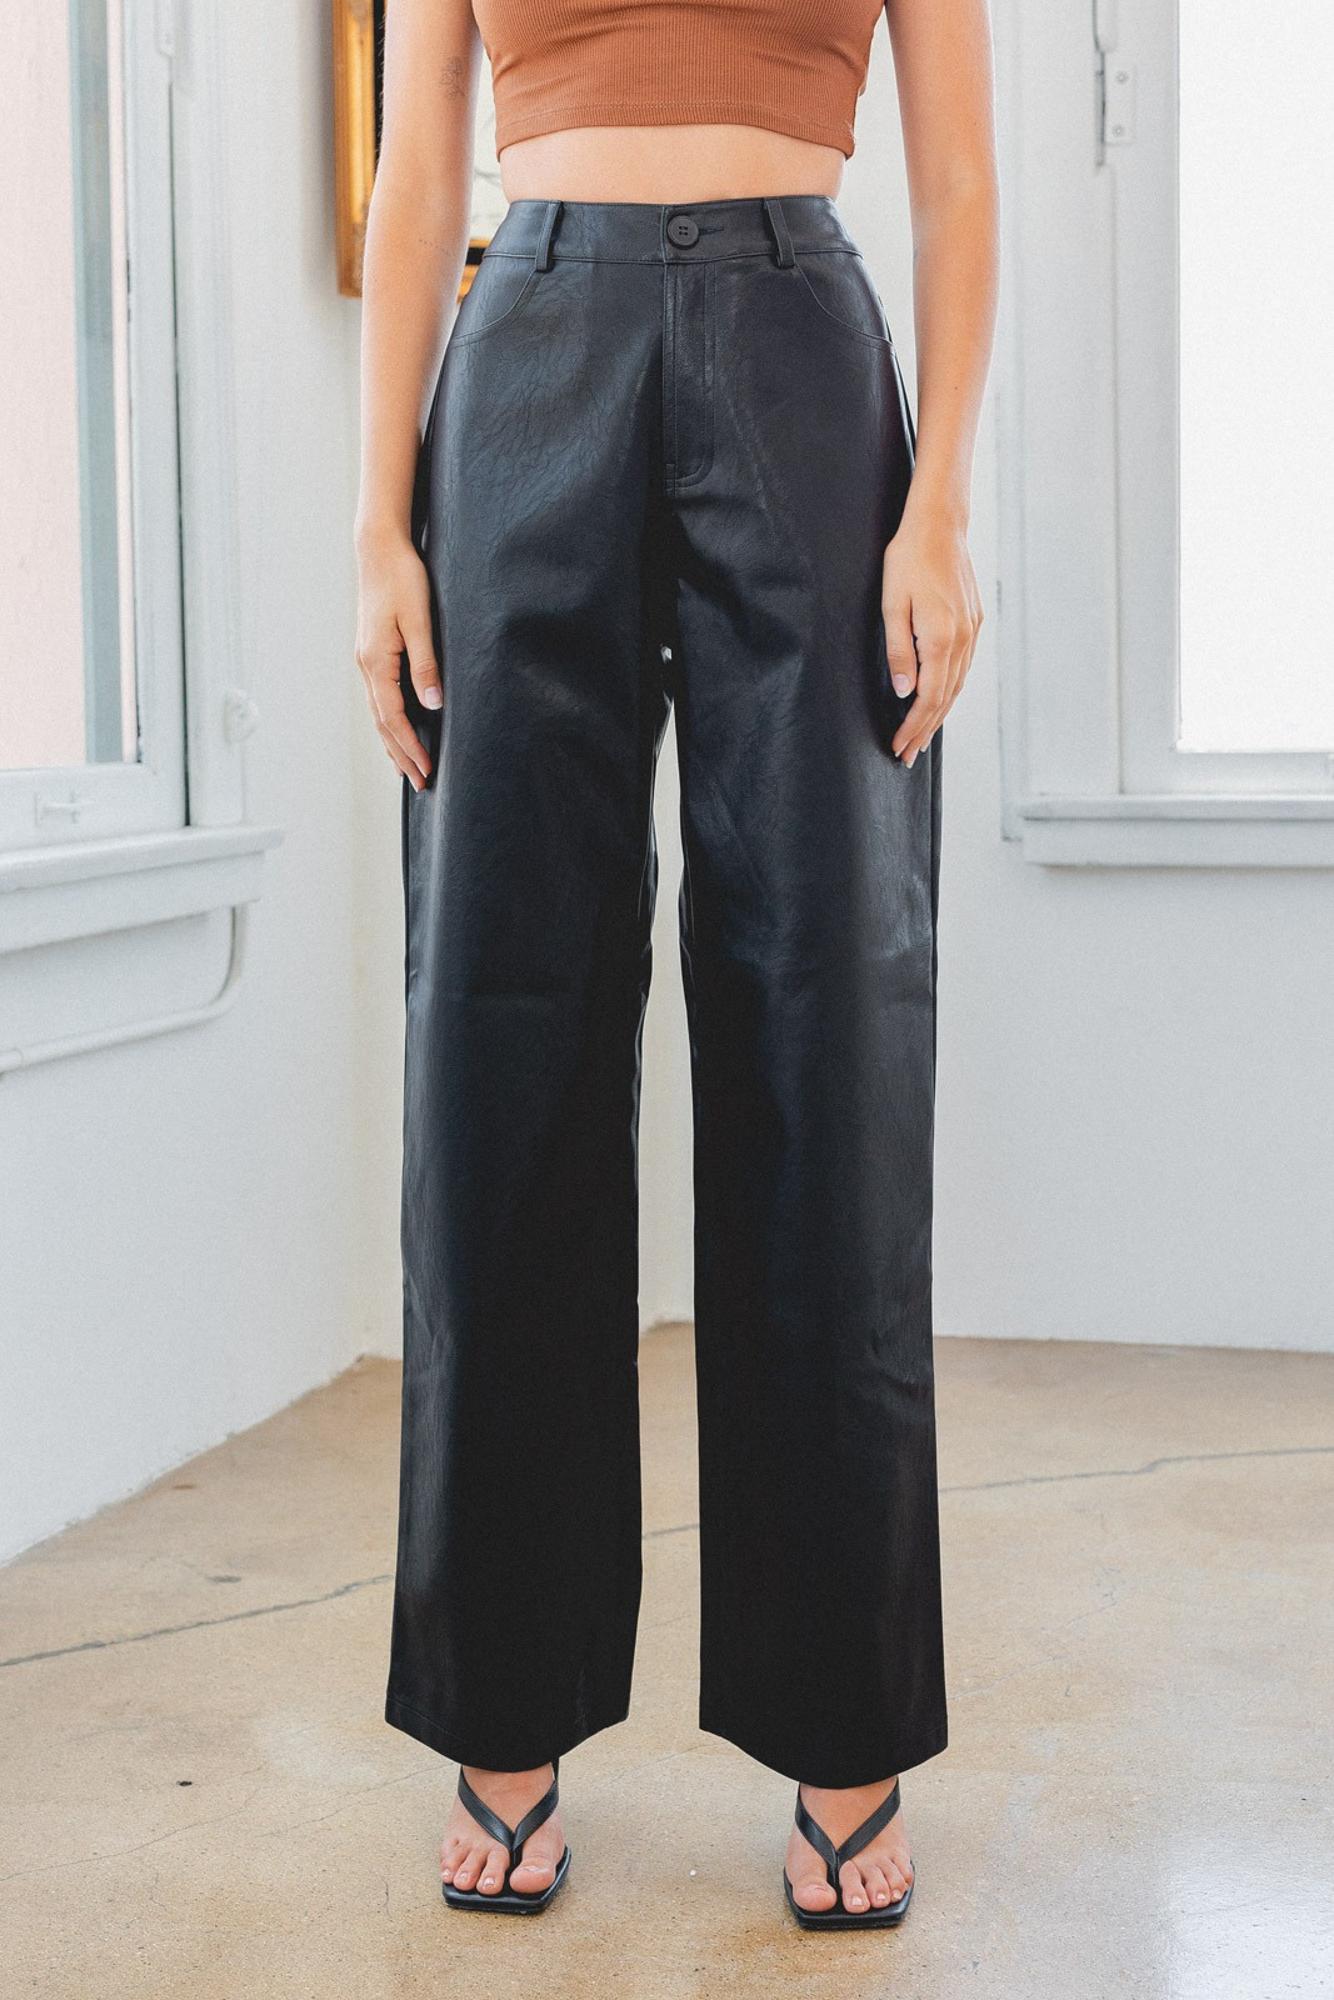 The Only One Leather Wide Leg Pants